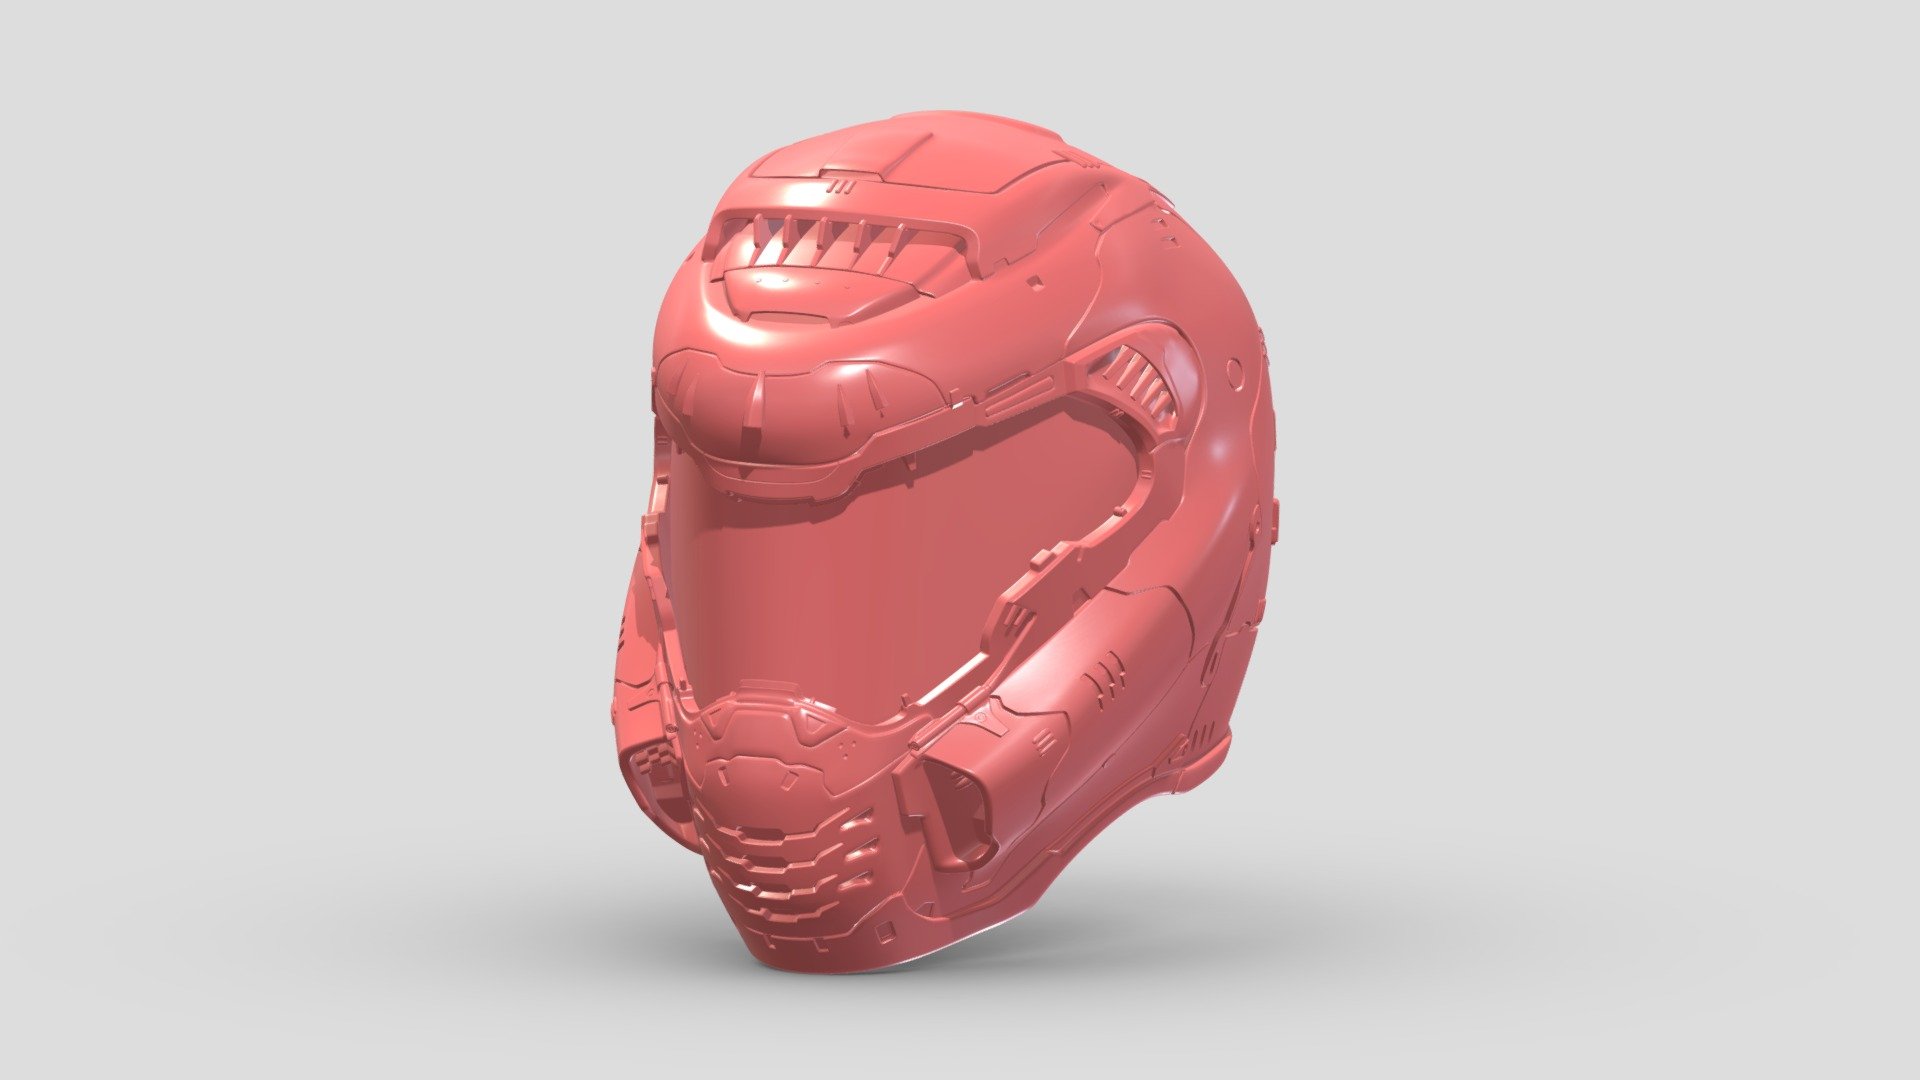 Contact me for customize size for you. ( free )

STL and OBJ file was included for 3D print.

Model created in 3ds max and checked in Meshmixer.
 - Doom Eternal Slayer Helmet 3D Print - Buy Royalty Free 3D model by Frezzy3D 3d model